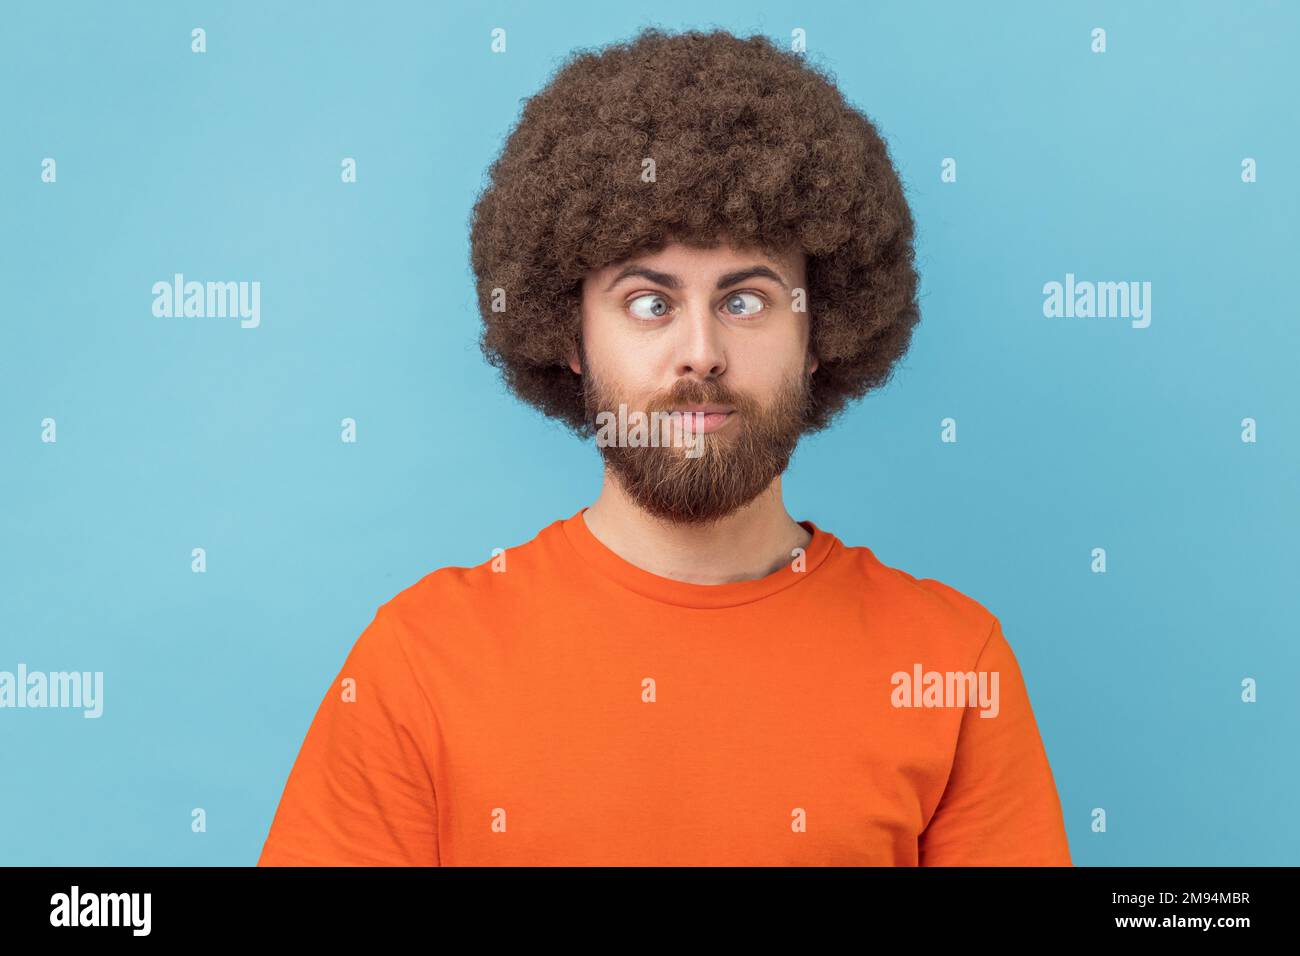 Portrait of crazy funny man with Afro hairstyle wearing orange T-shirt ...